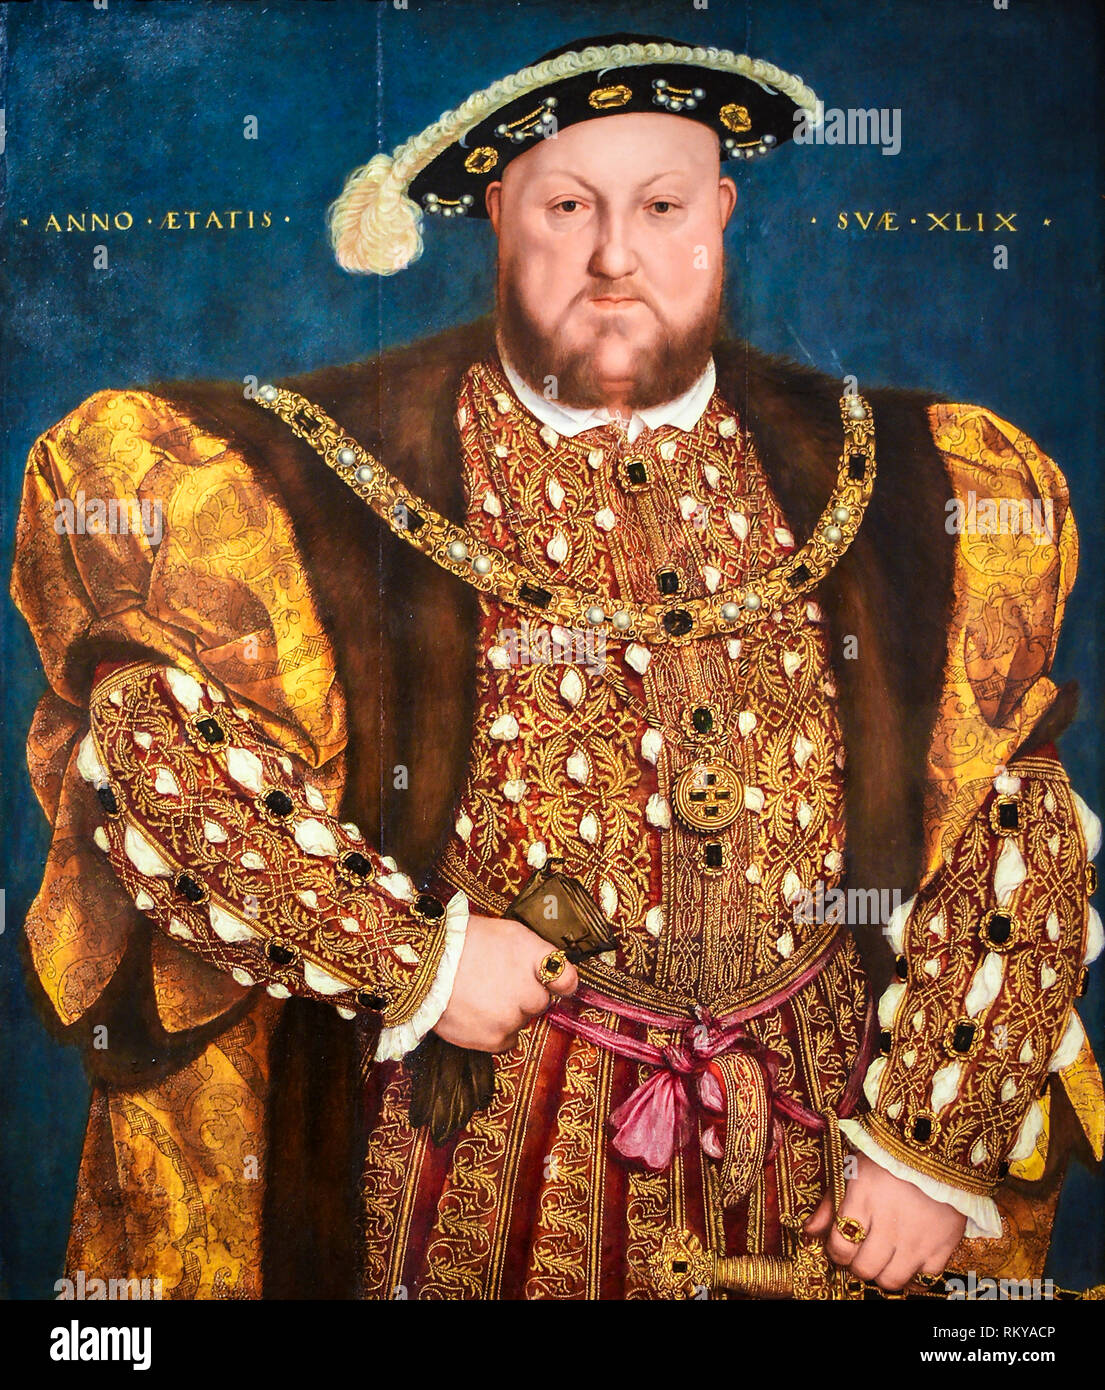 Henry VIII of England, portrait by Hans Holbein the Younger, 1540, painting Stock Photo